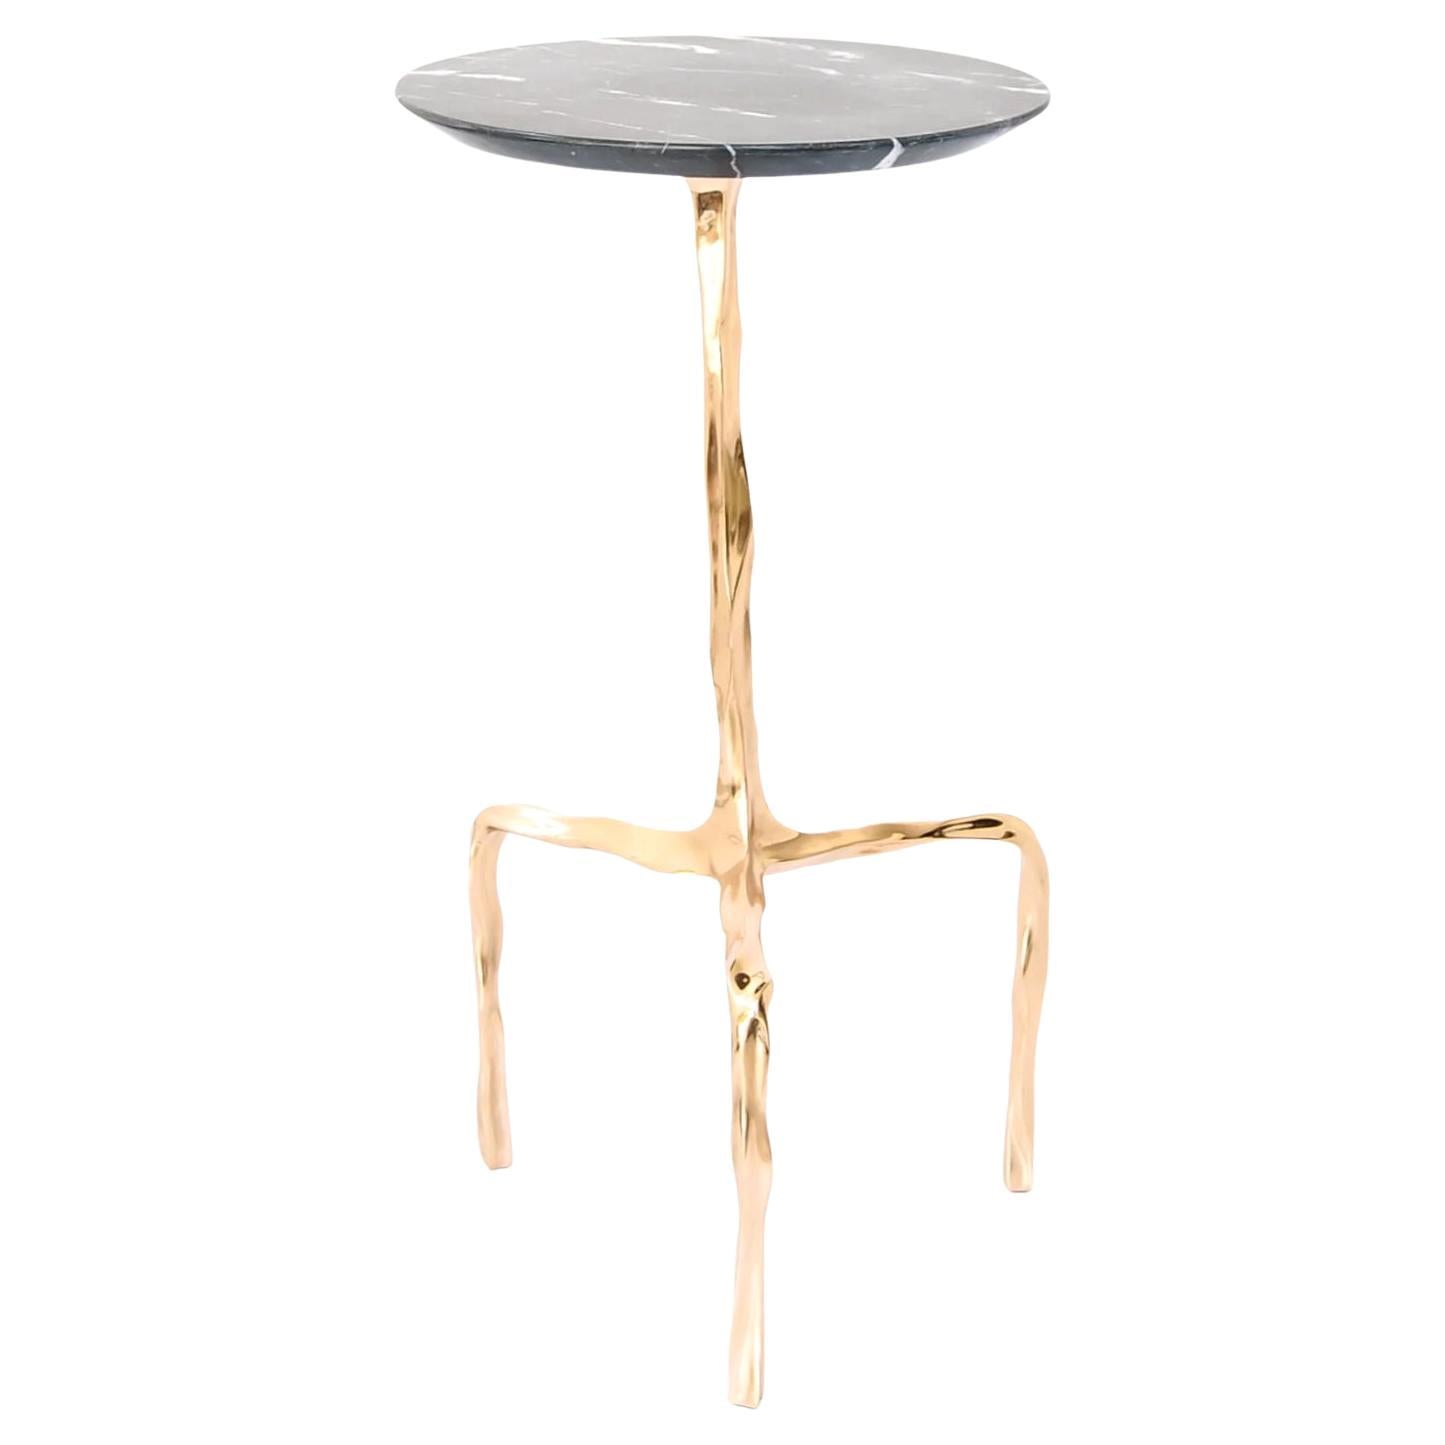 Aretha Drink Table with Nero Marquina Marble Top by Fakasaka Design